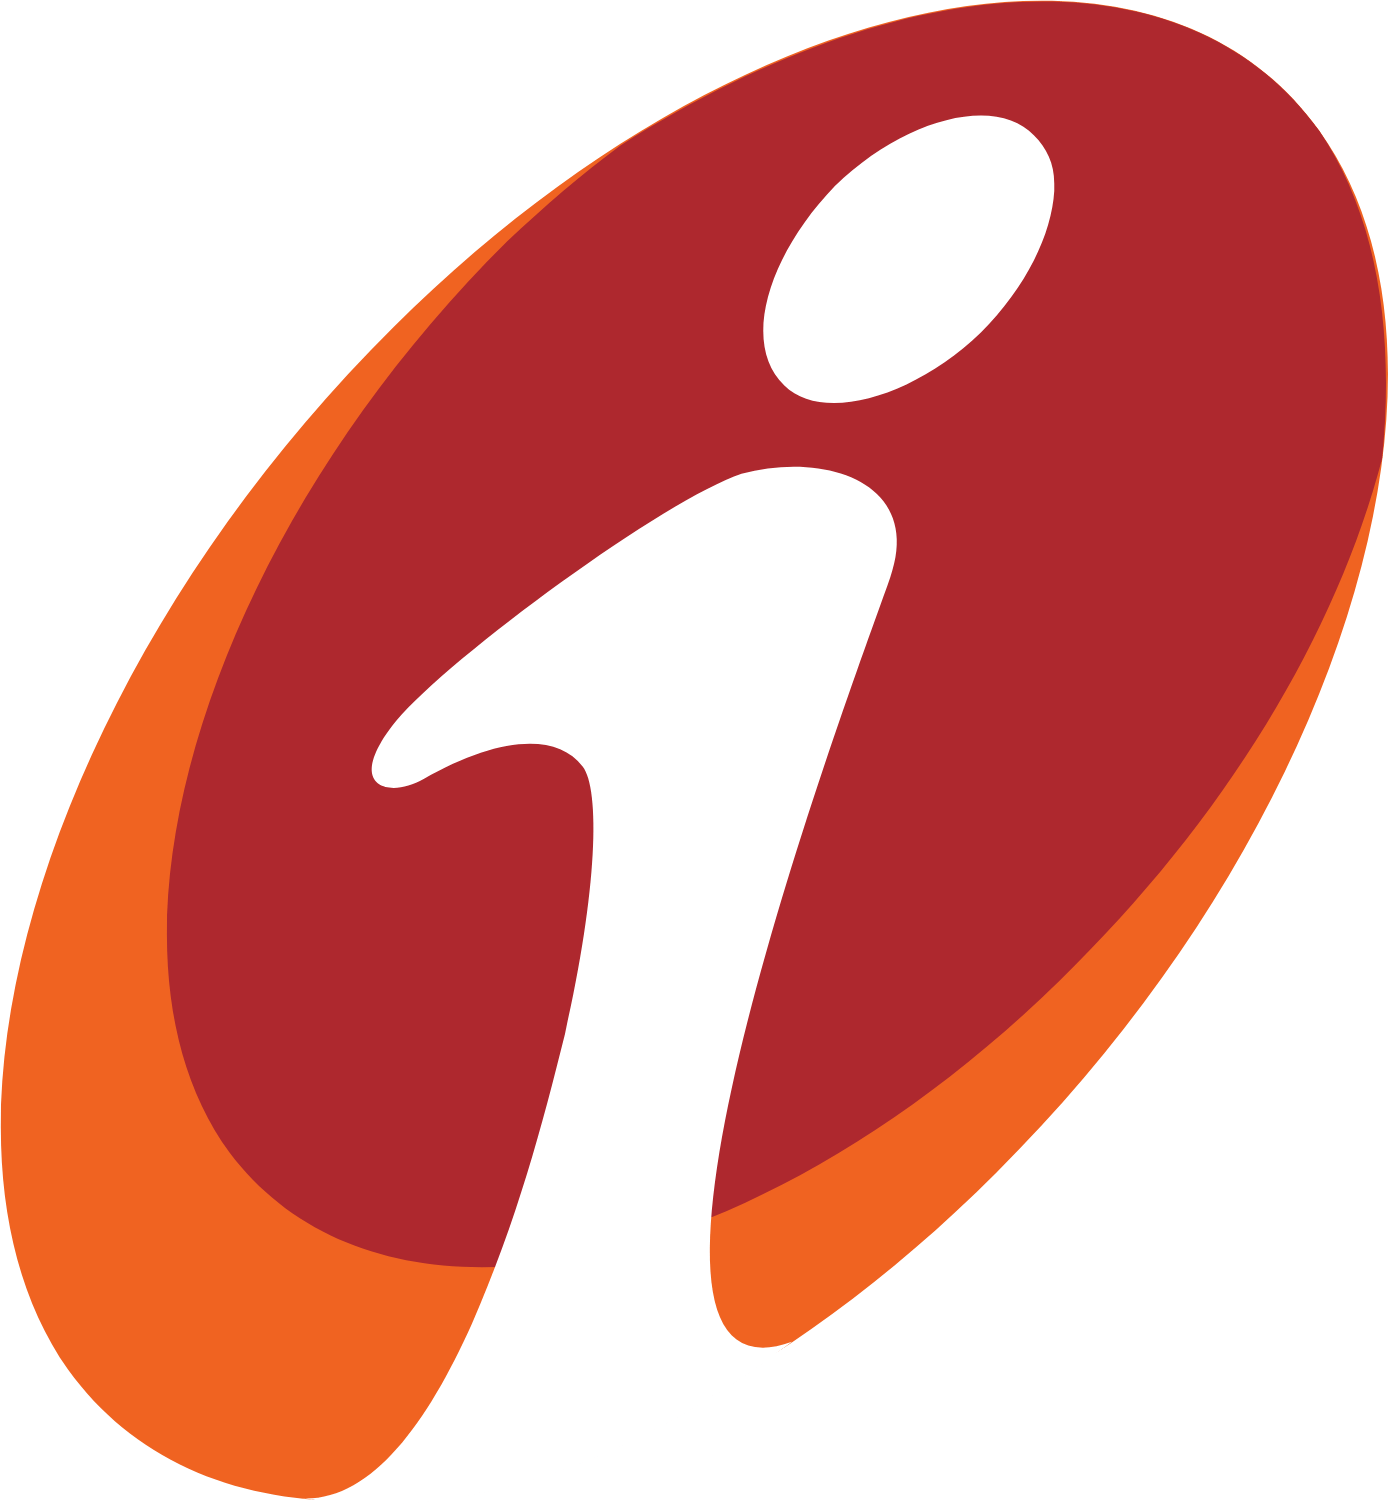 ICICI Bank Logo - ICICI Bank logo in transparent PNG and ...